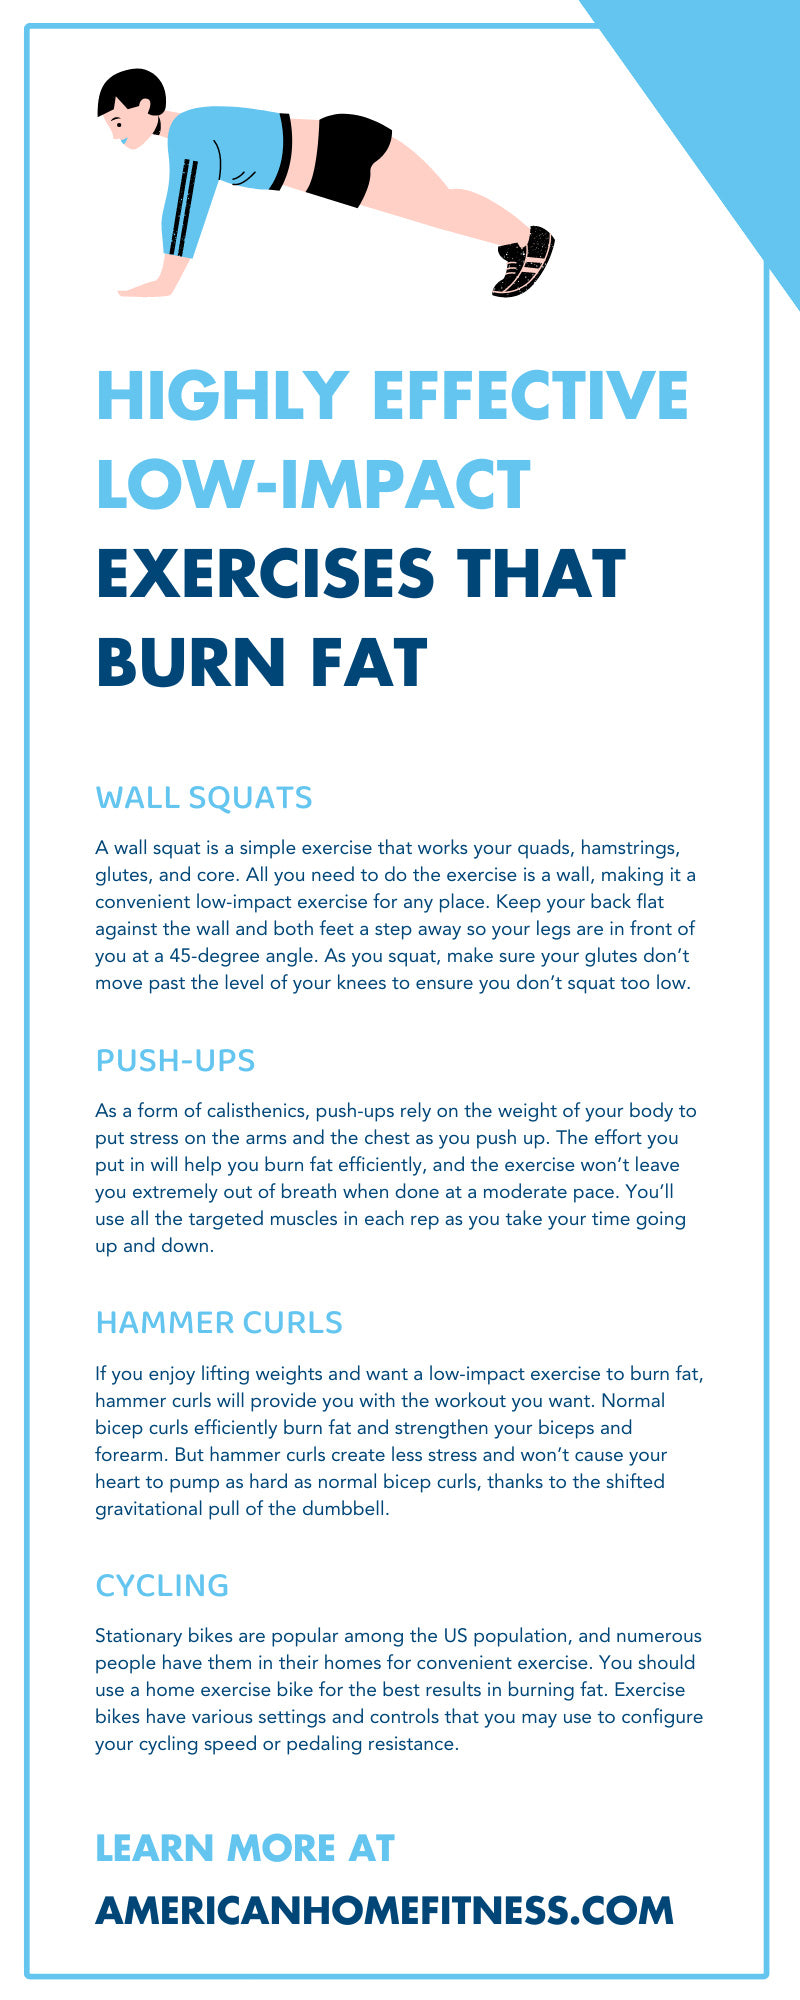 Highly Effective Low-Impact Exercises That Burn Fat